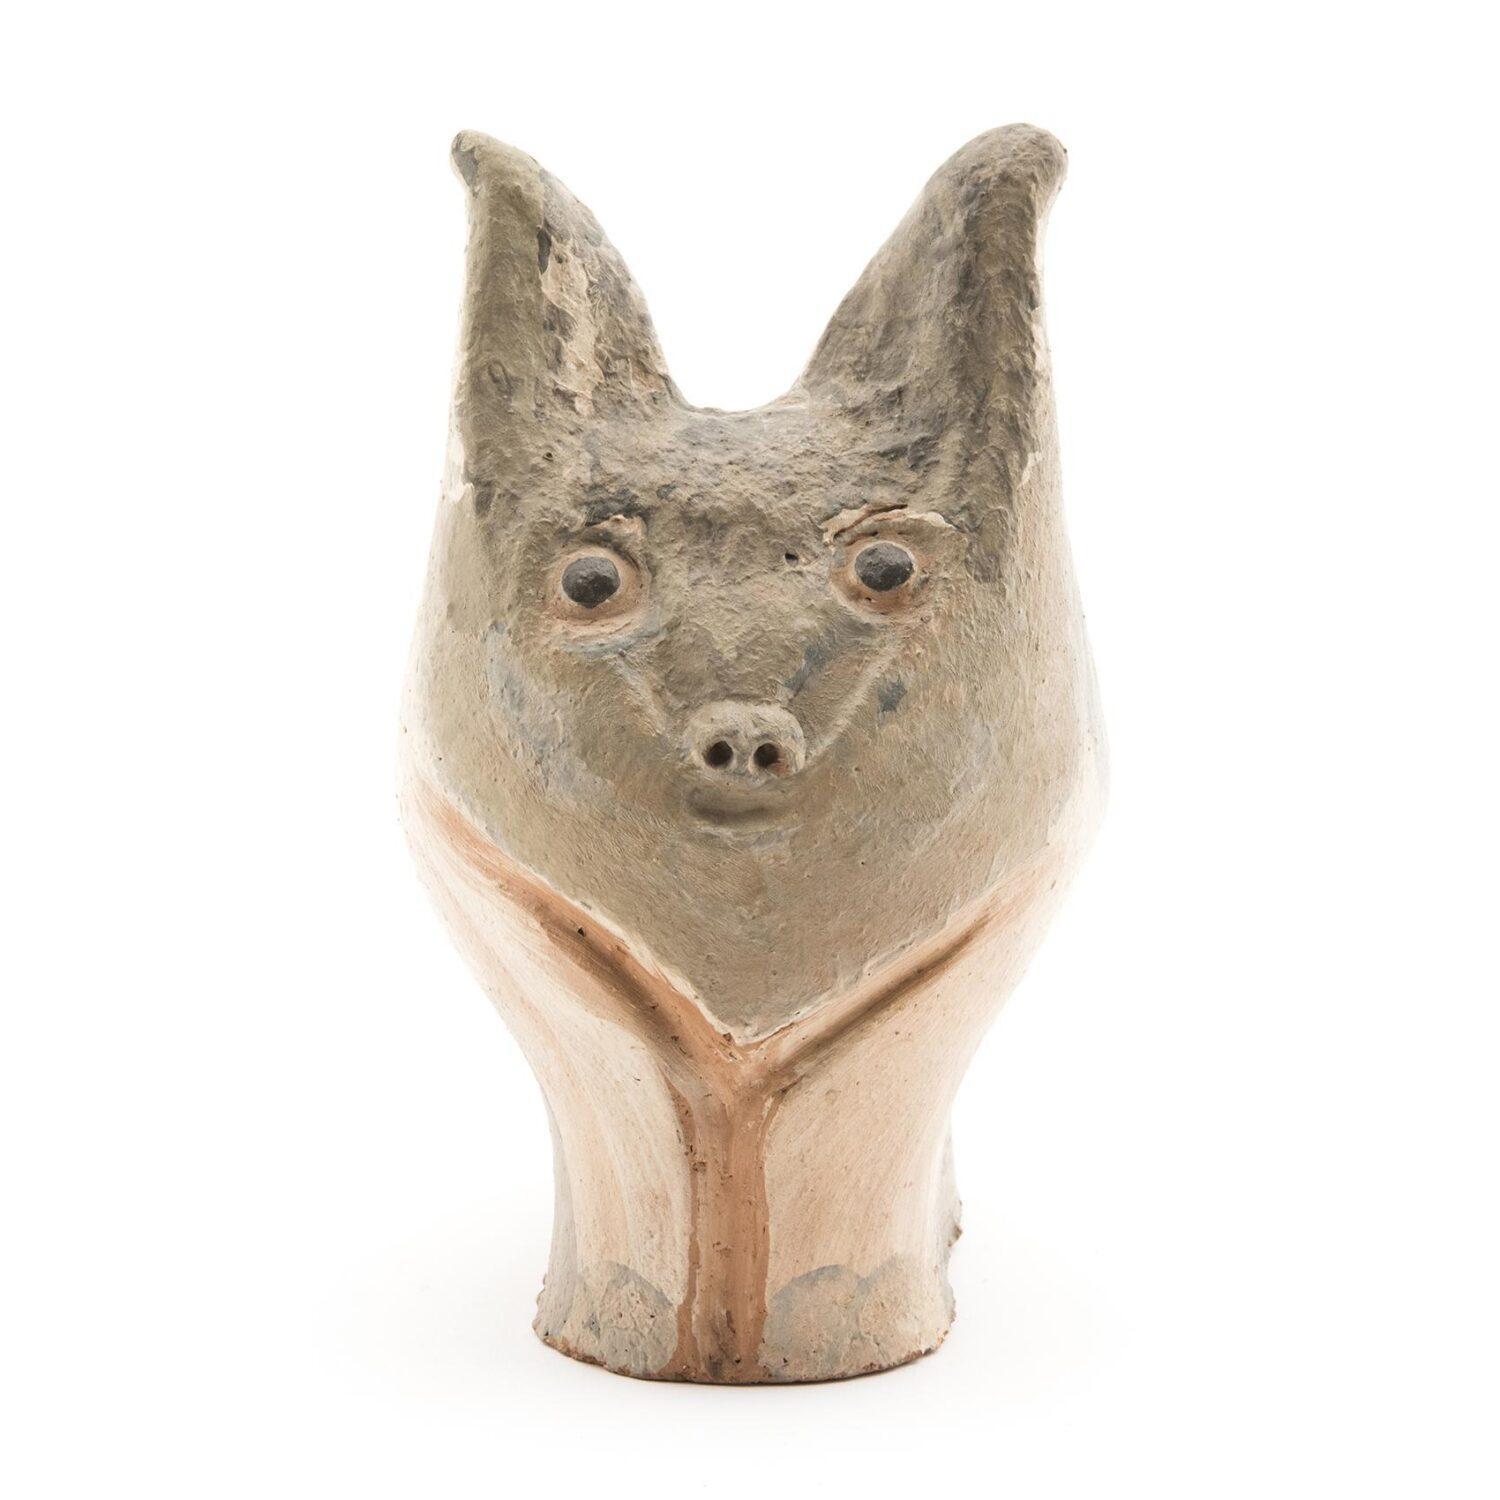 A fox? A wolf?
A unique work by Jules Agard, one of masters of Vallauris ceramists and sculptors in 1950s. Signed.
Jules Agard was one of important French ceramists and sculptors who worked closely with Pablo Picasso.